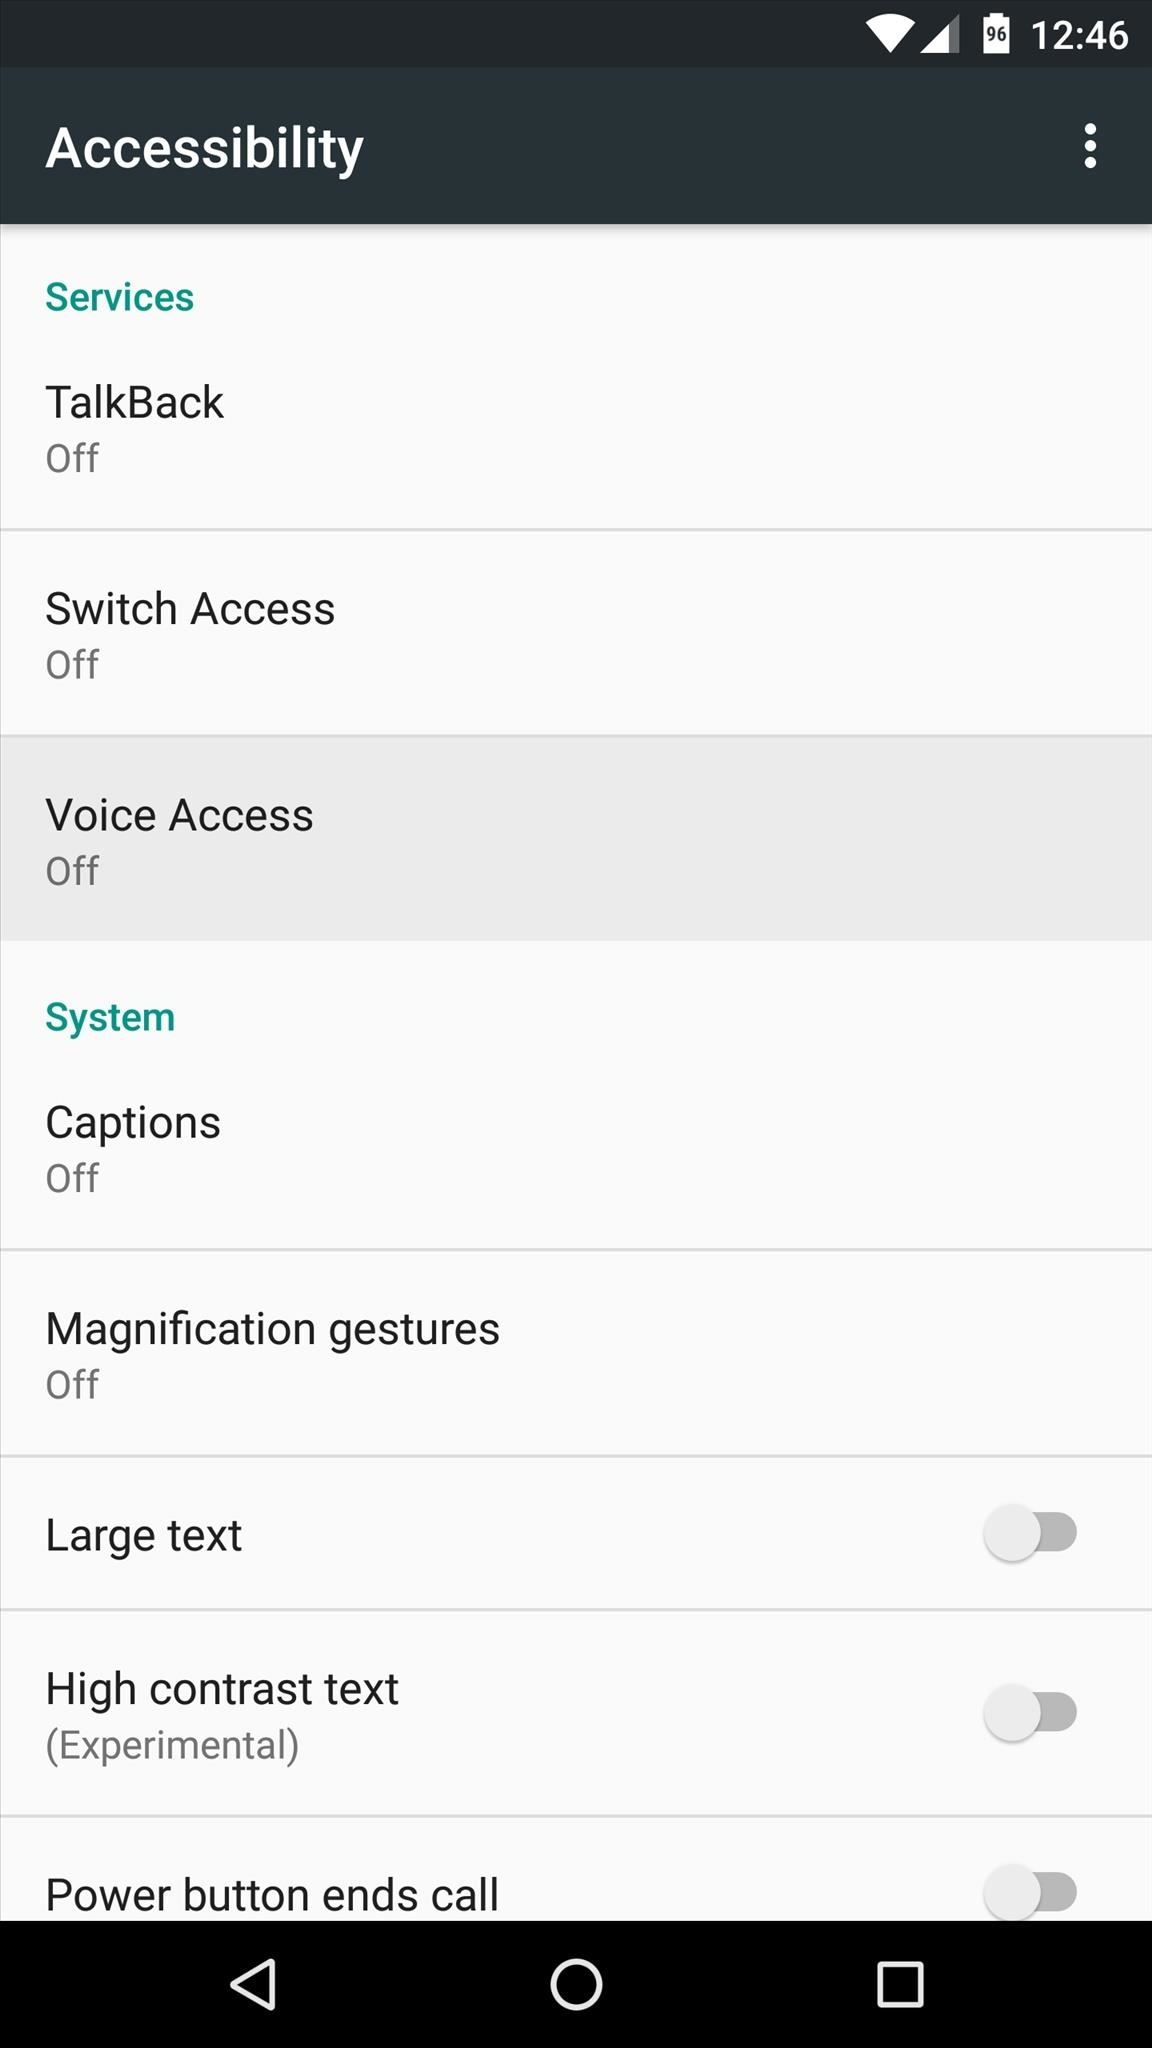 How to Use Your Android Phone Without Ever Touching It